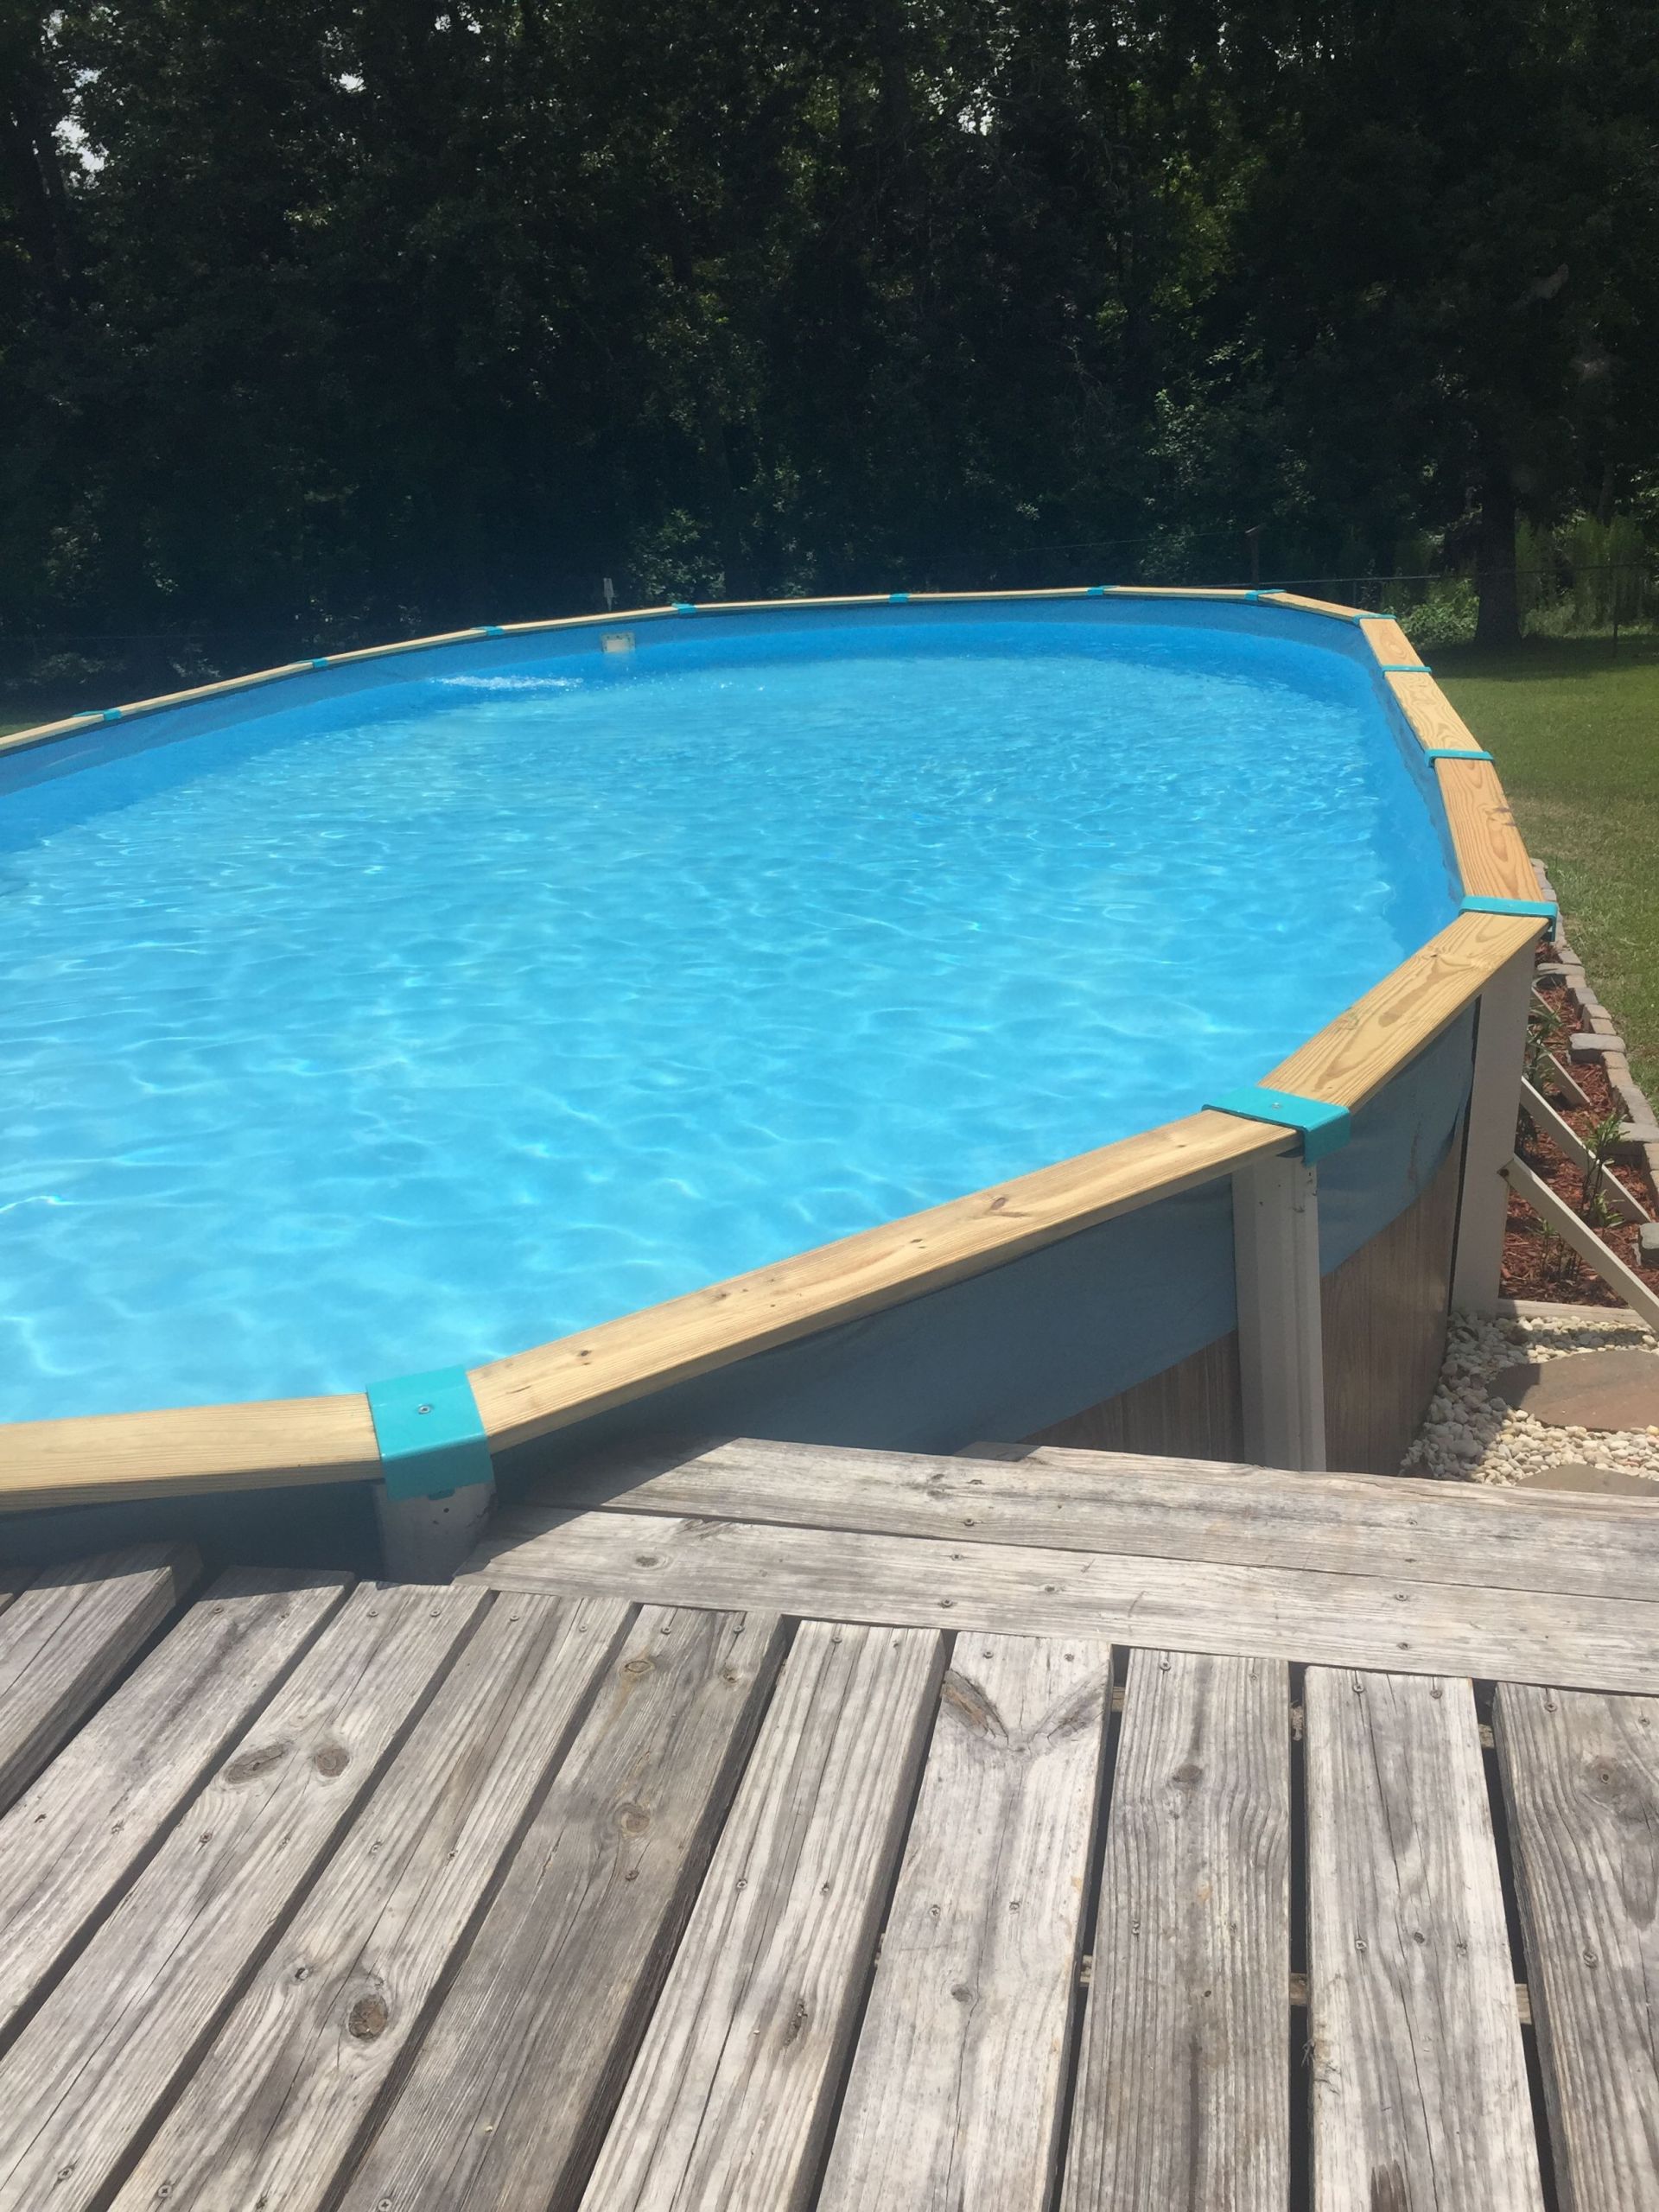 Above Ground Pool Rails
 Wood top rails for above ground pool The metal top